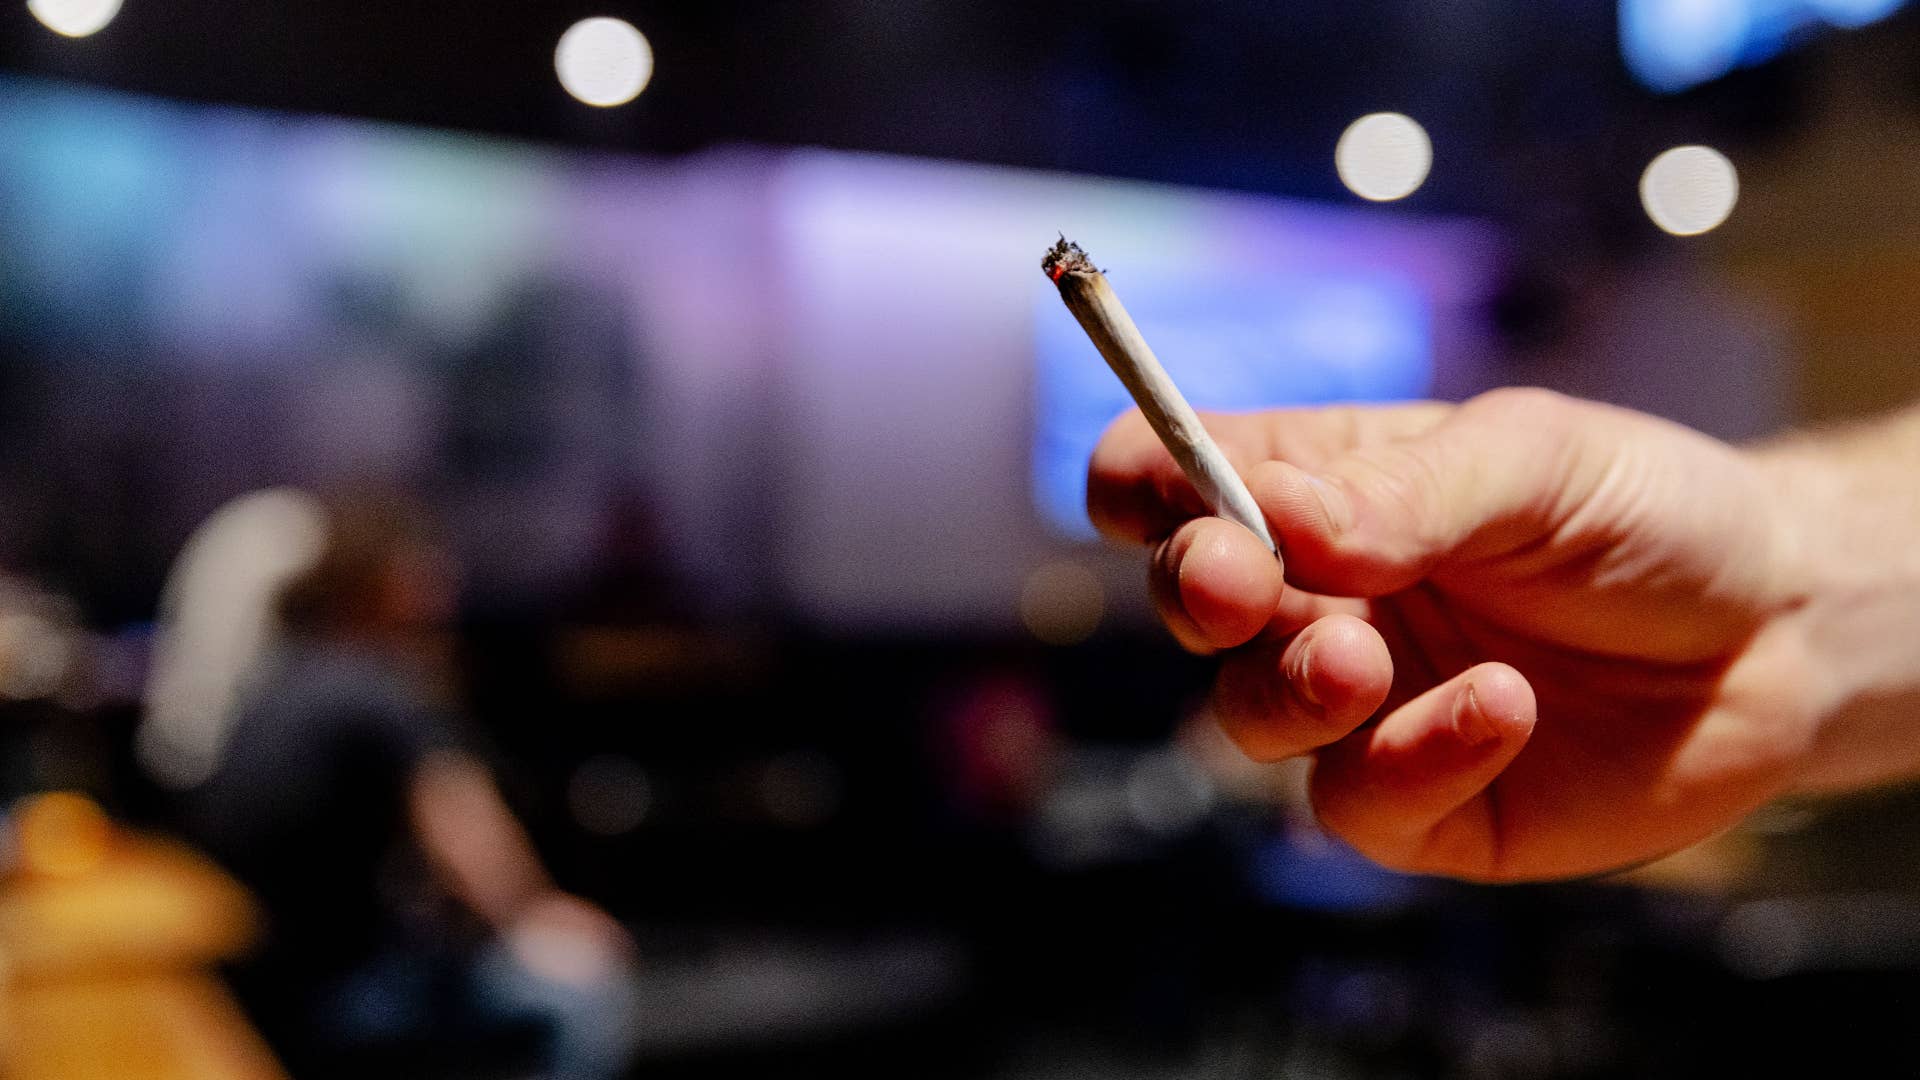 This photograph shows person holding a lit cannabis "joint" in Cremers Coffee Shop in The Hague.